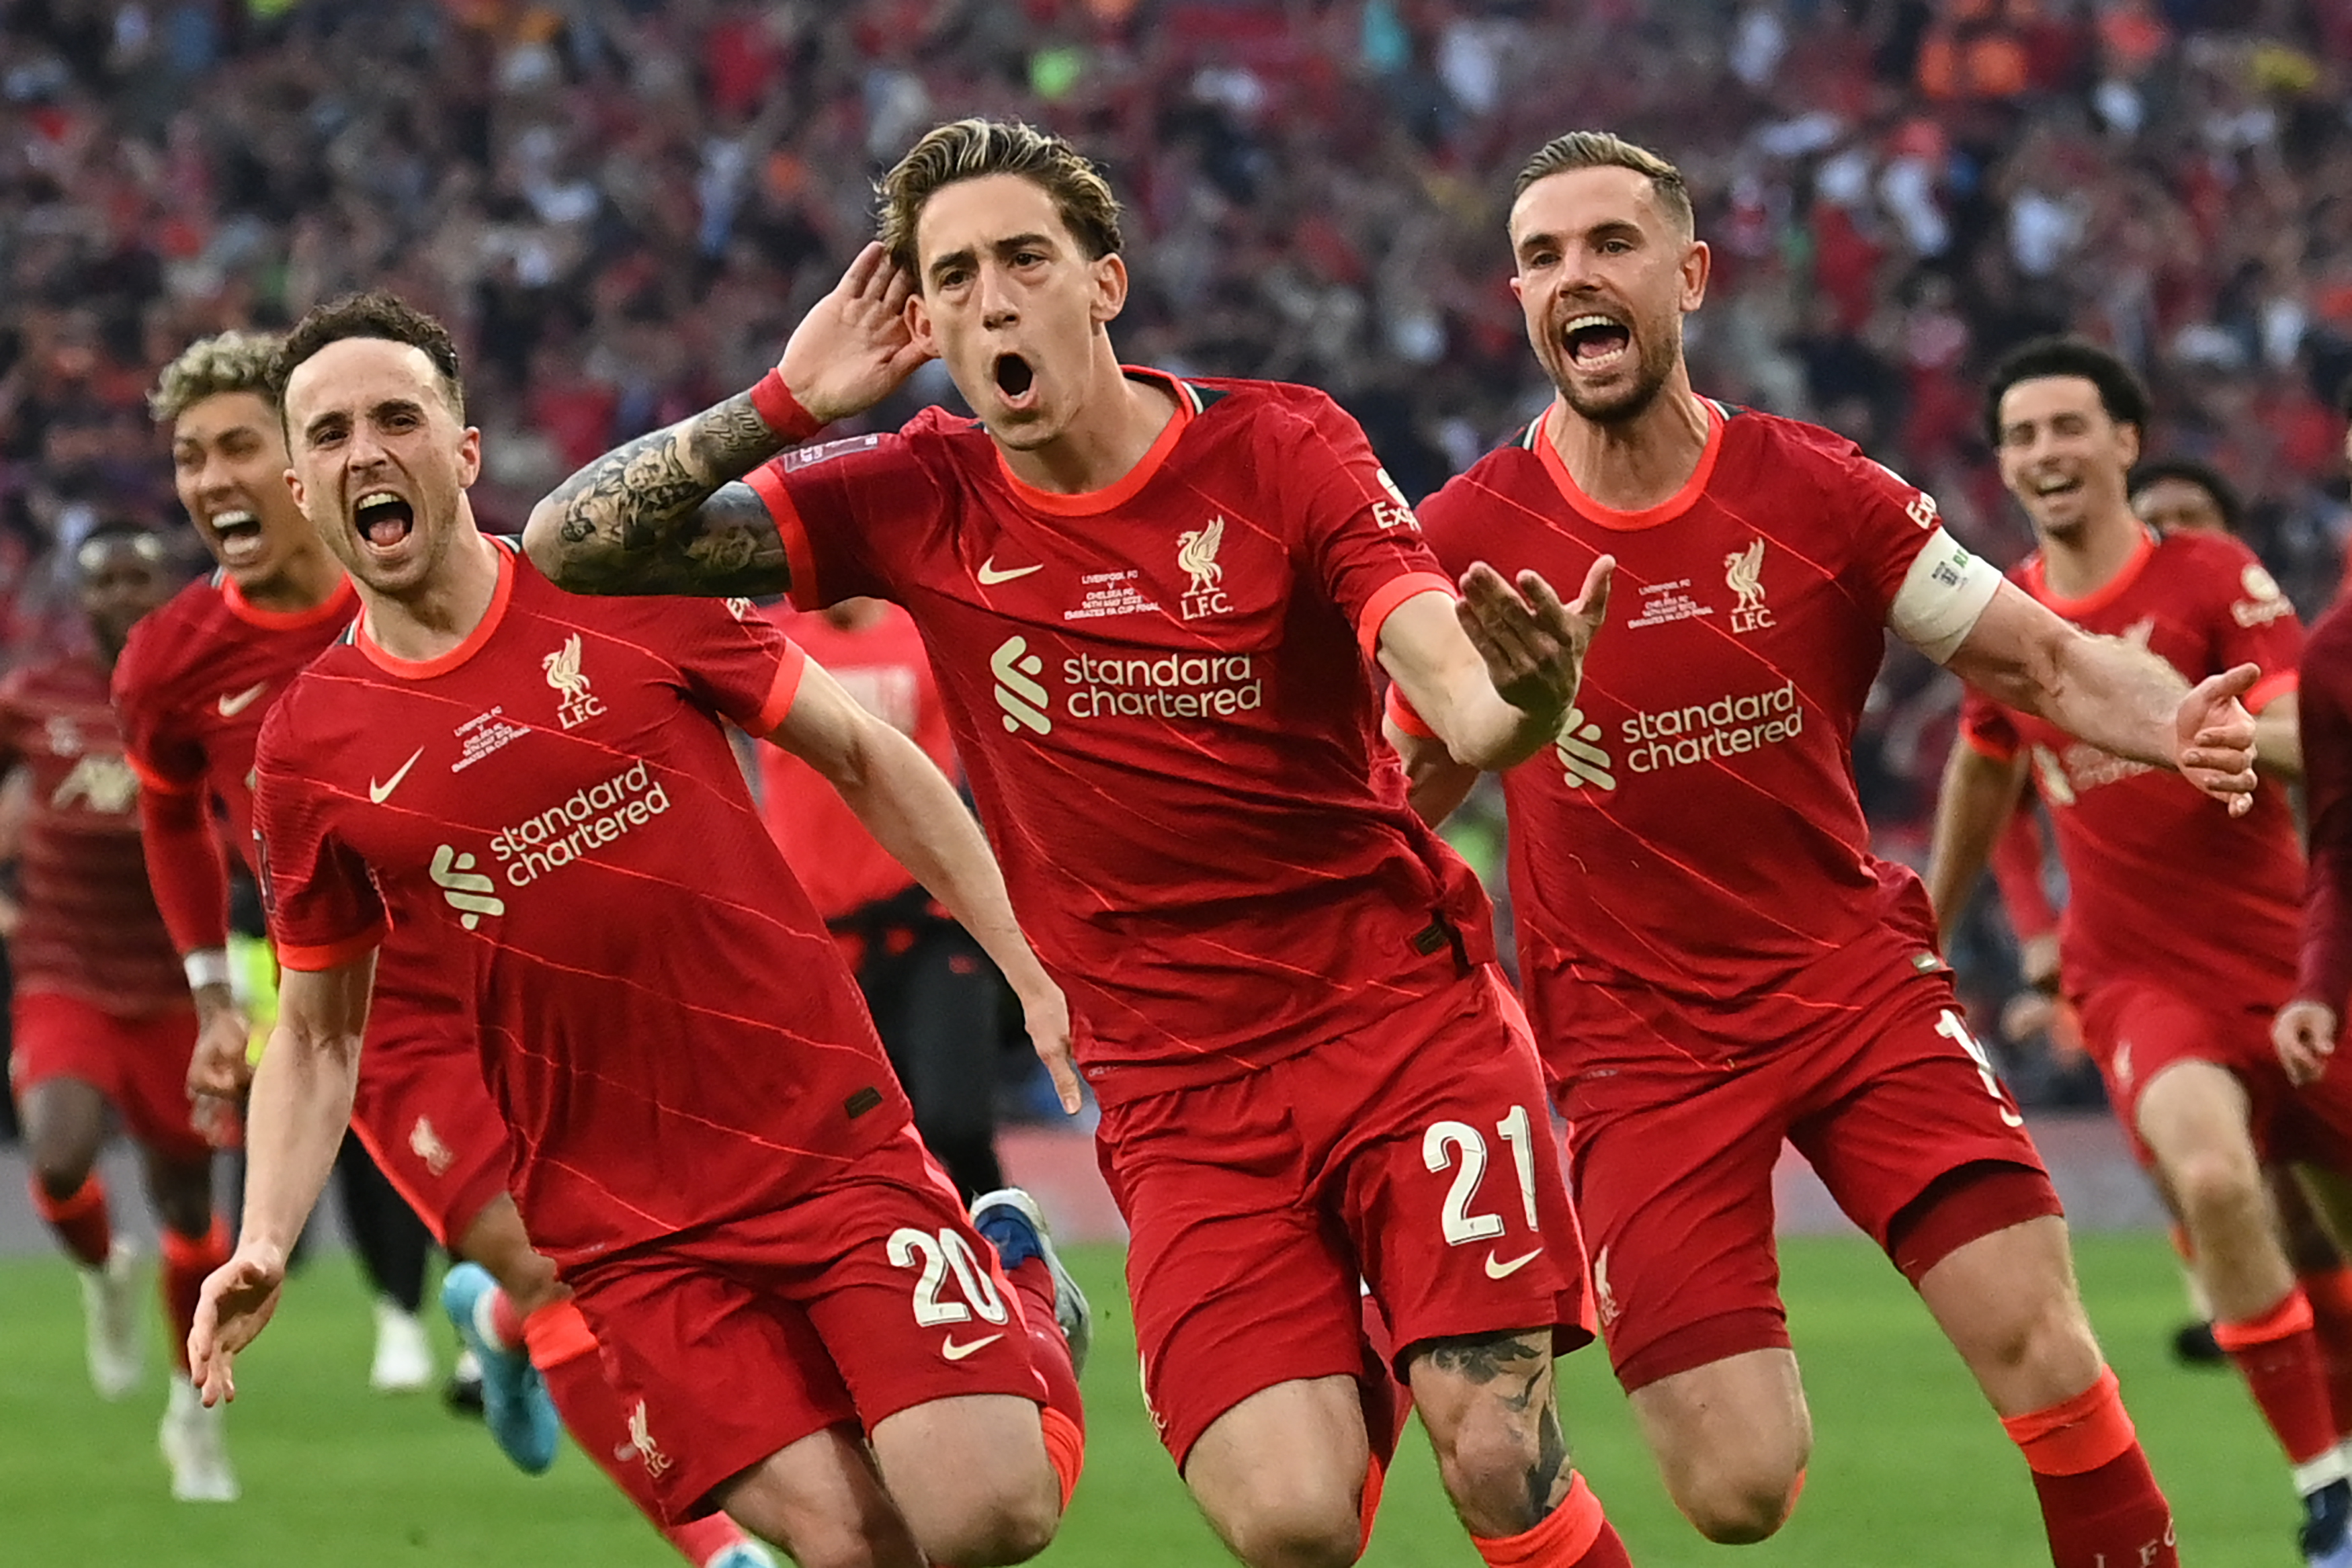 LIVE FROM WEMBLEY: Tsimikas the unlikely hero as Liverpool beat Chelsea on penalties to lift FA Cup